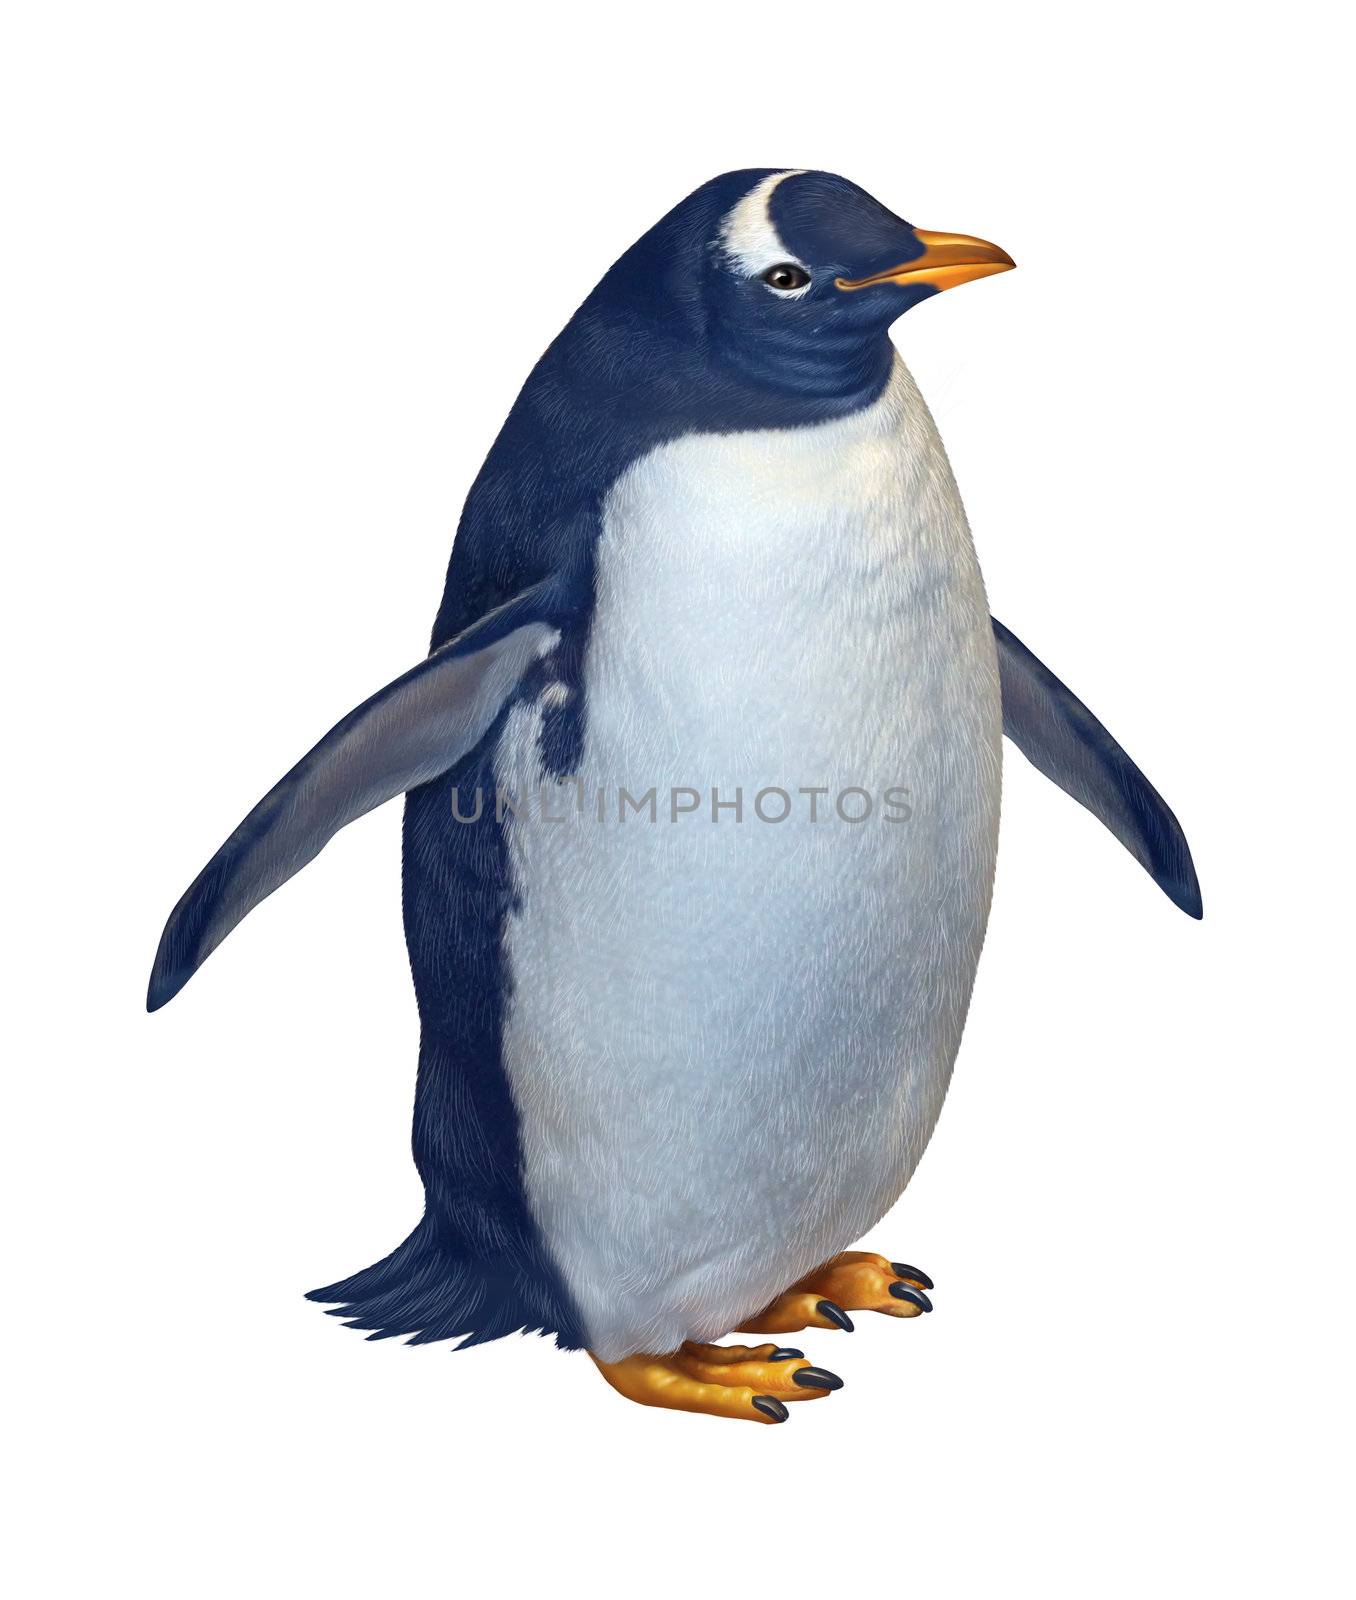 Penguin isolated on a white background as a wildlife nature and conservation symbol of arctic birds living in the south or north pole.